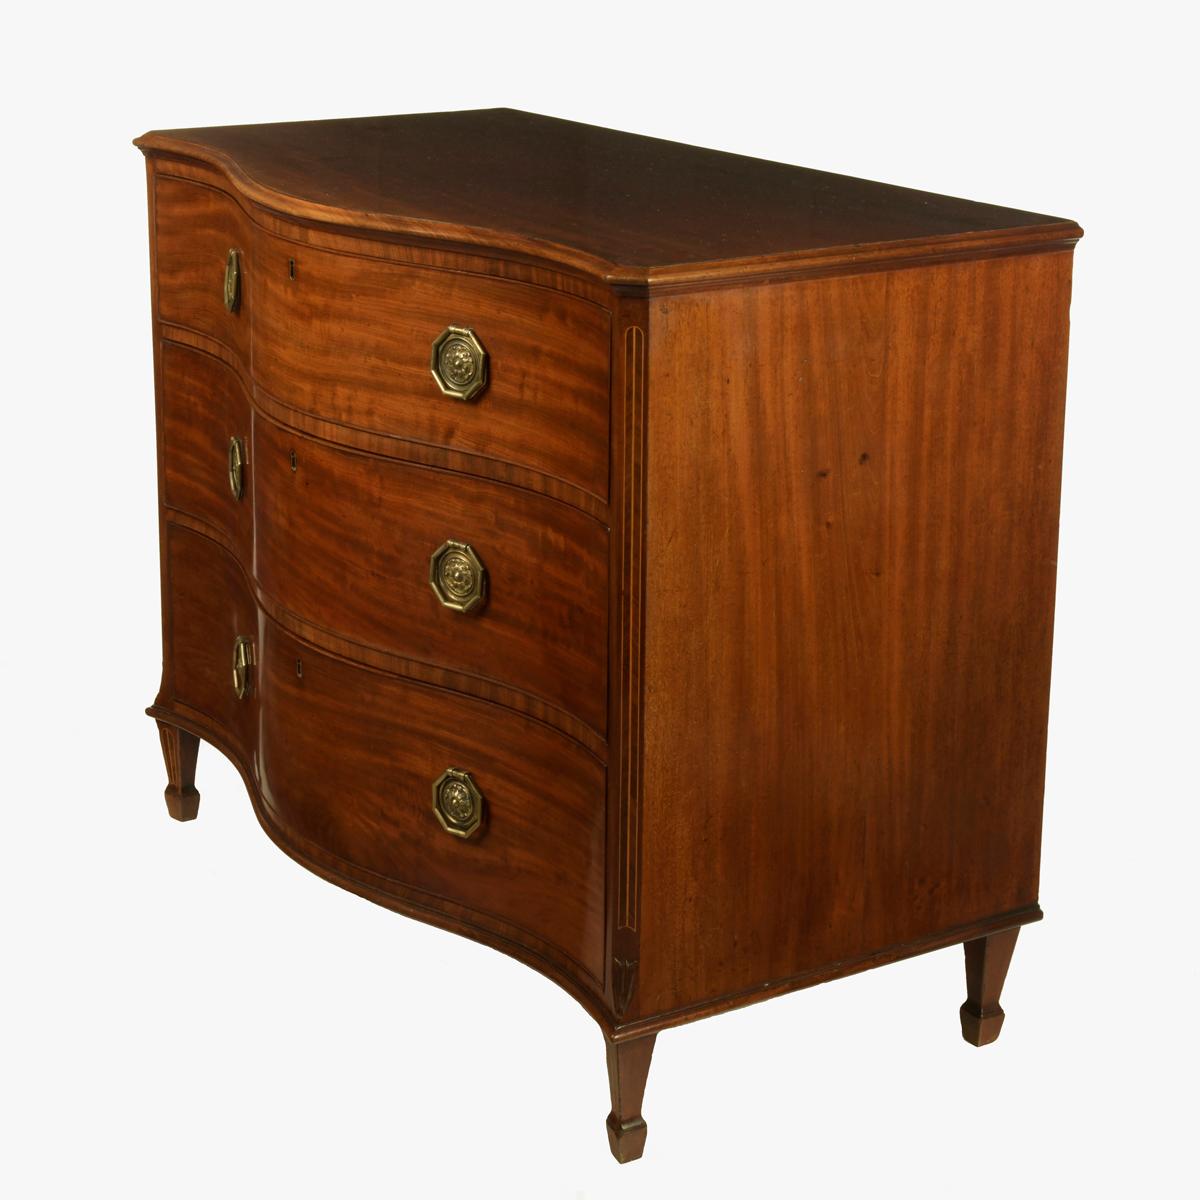 A George III mahogany serpentine chest of drawers, with three long graduated drawers flanked by canted and line-inlaid corners with octagonal brass handles, raised on conforming square tapering legs and spade feet. English, circa